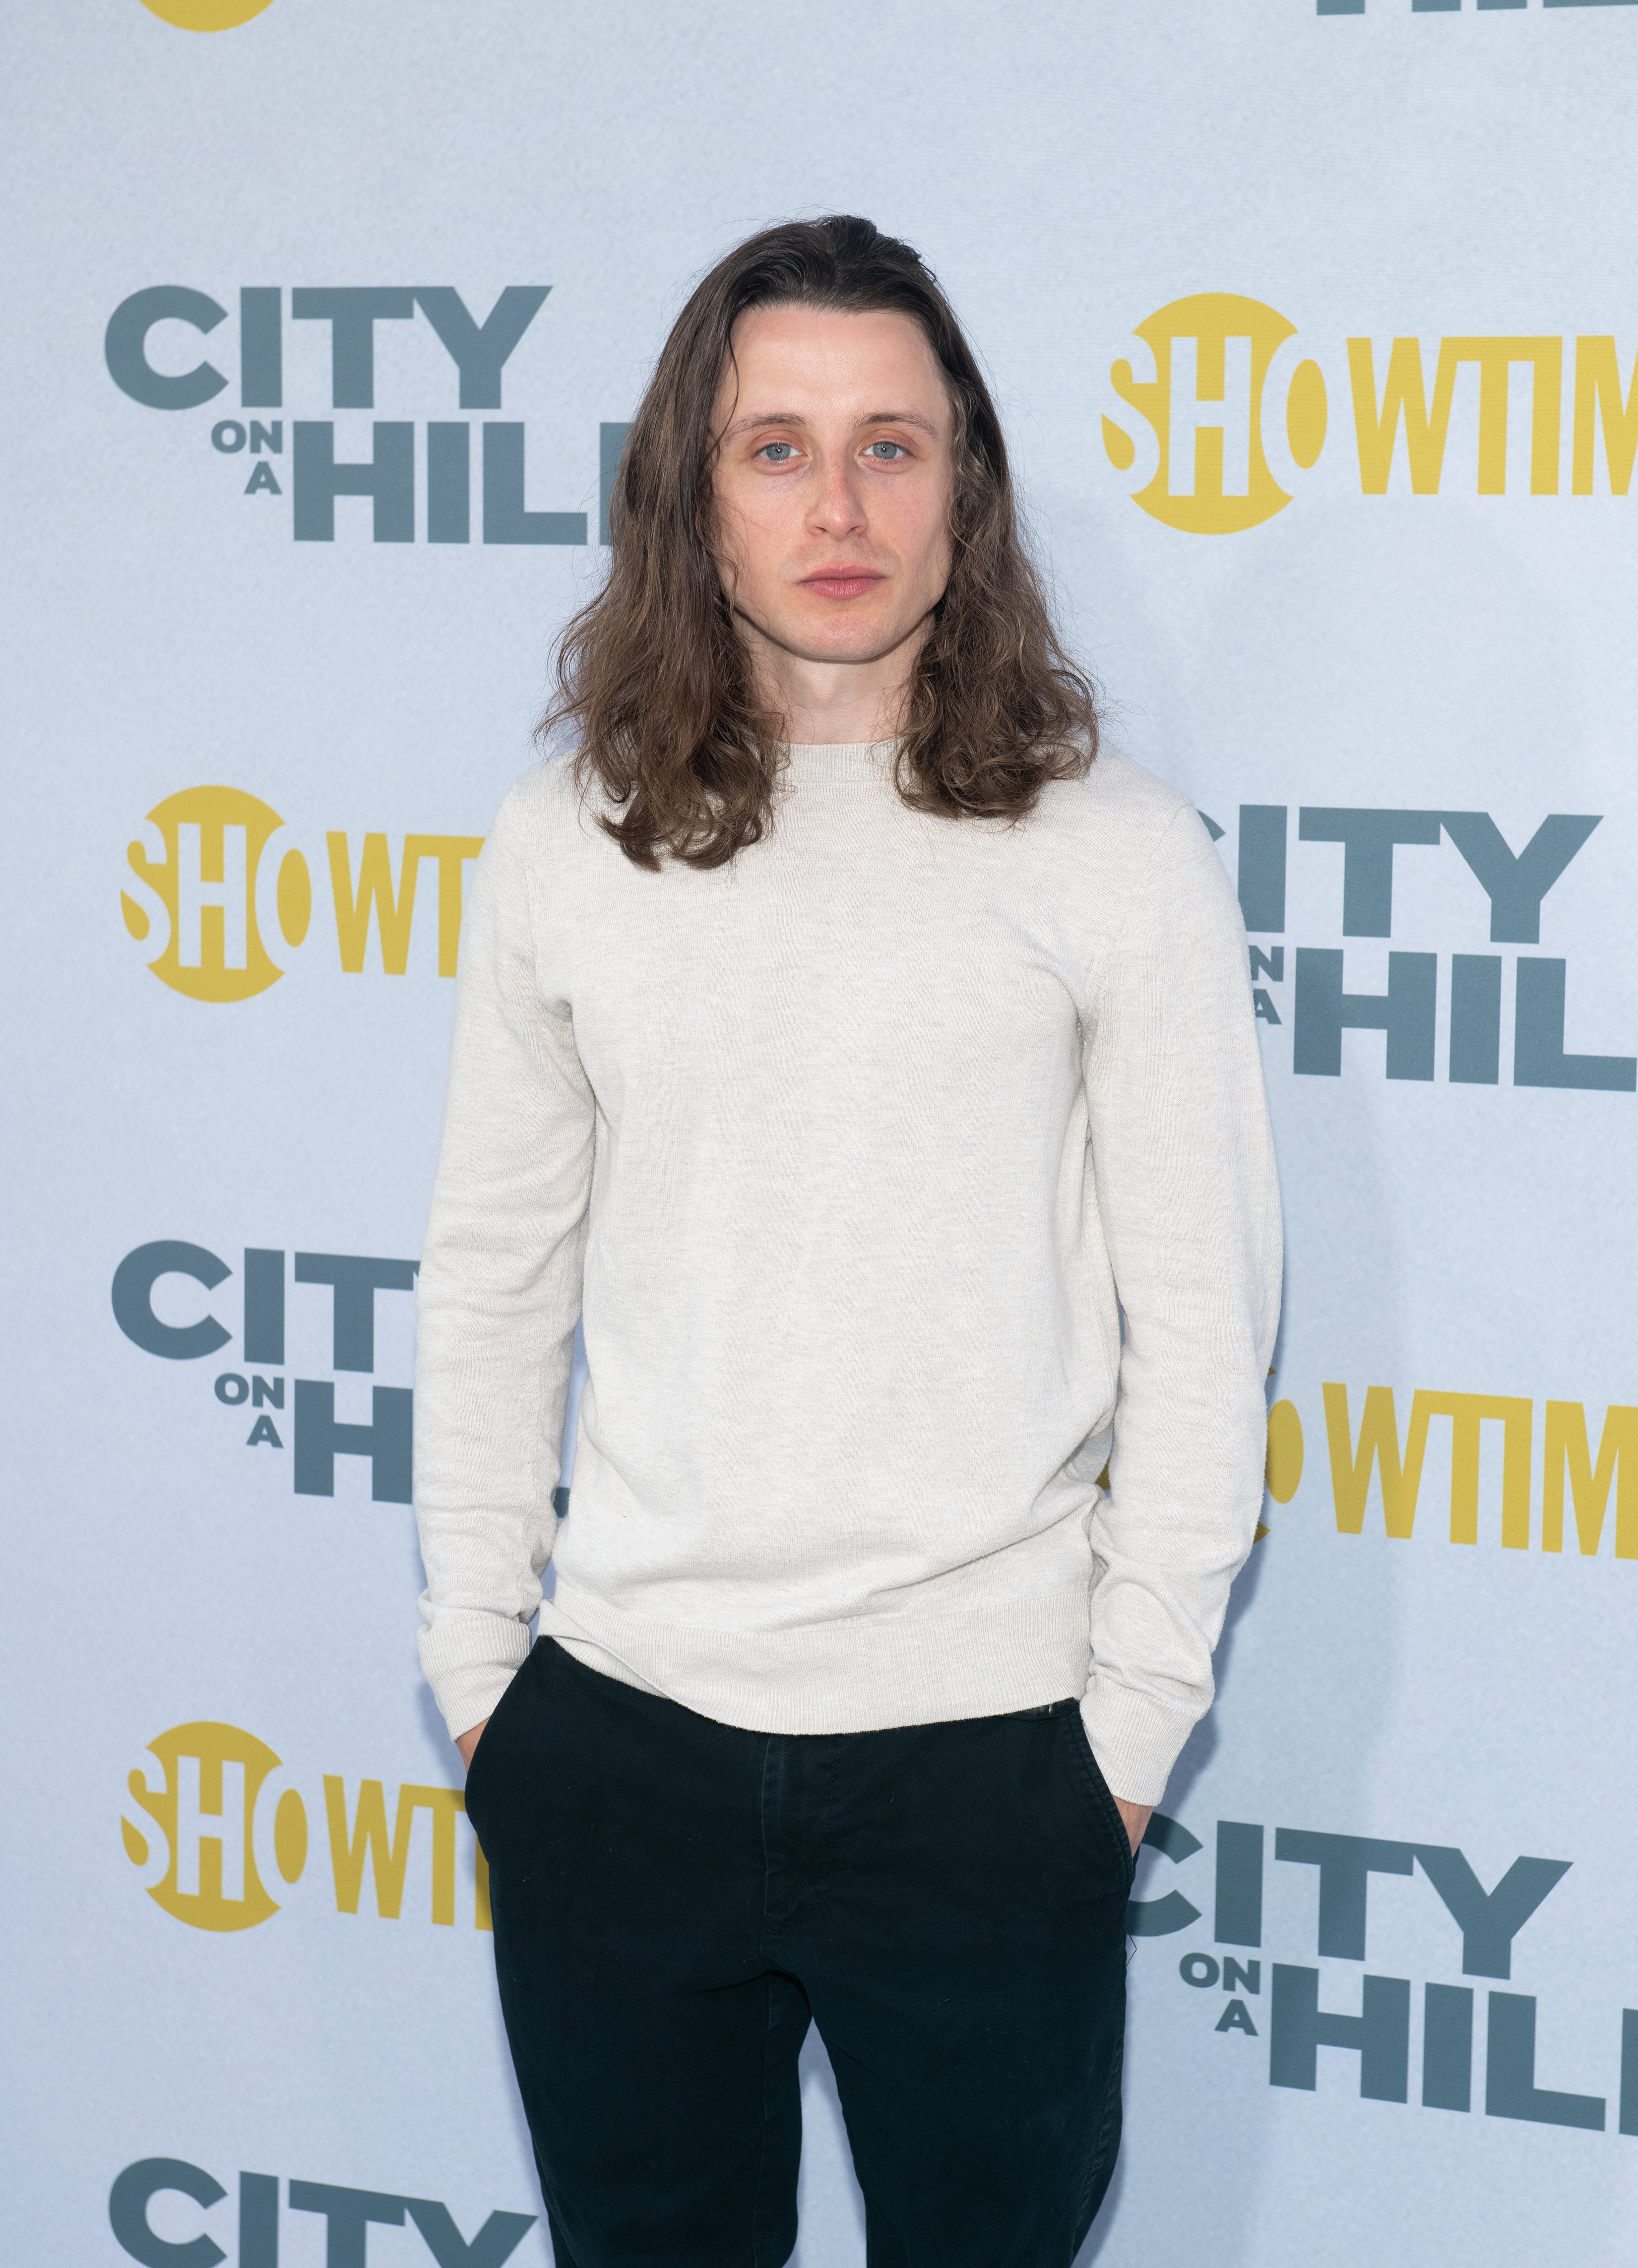 Rory Culkin attends Showtime's "City on a Hill" New York Premiere at SVA Theater on June 04, 2019 in New York City. | Source: Getty Images